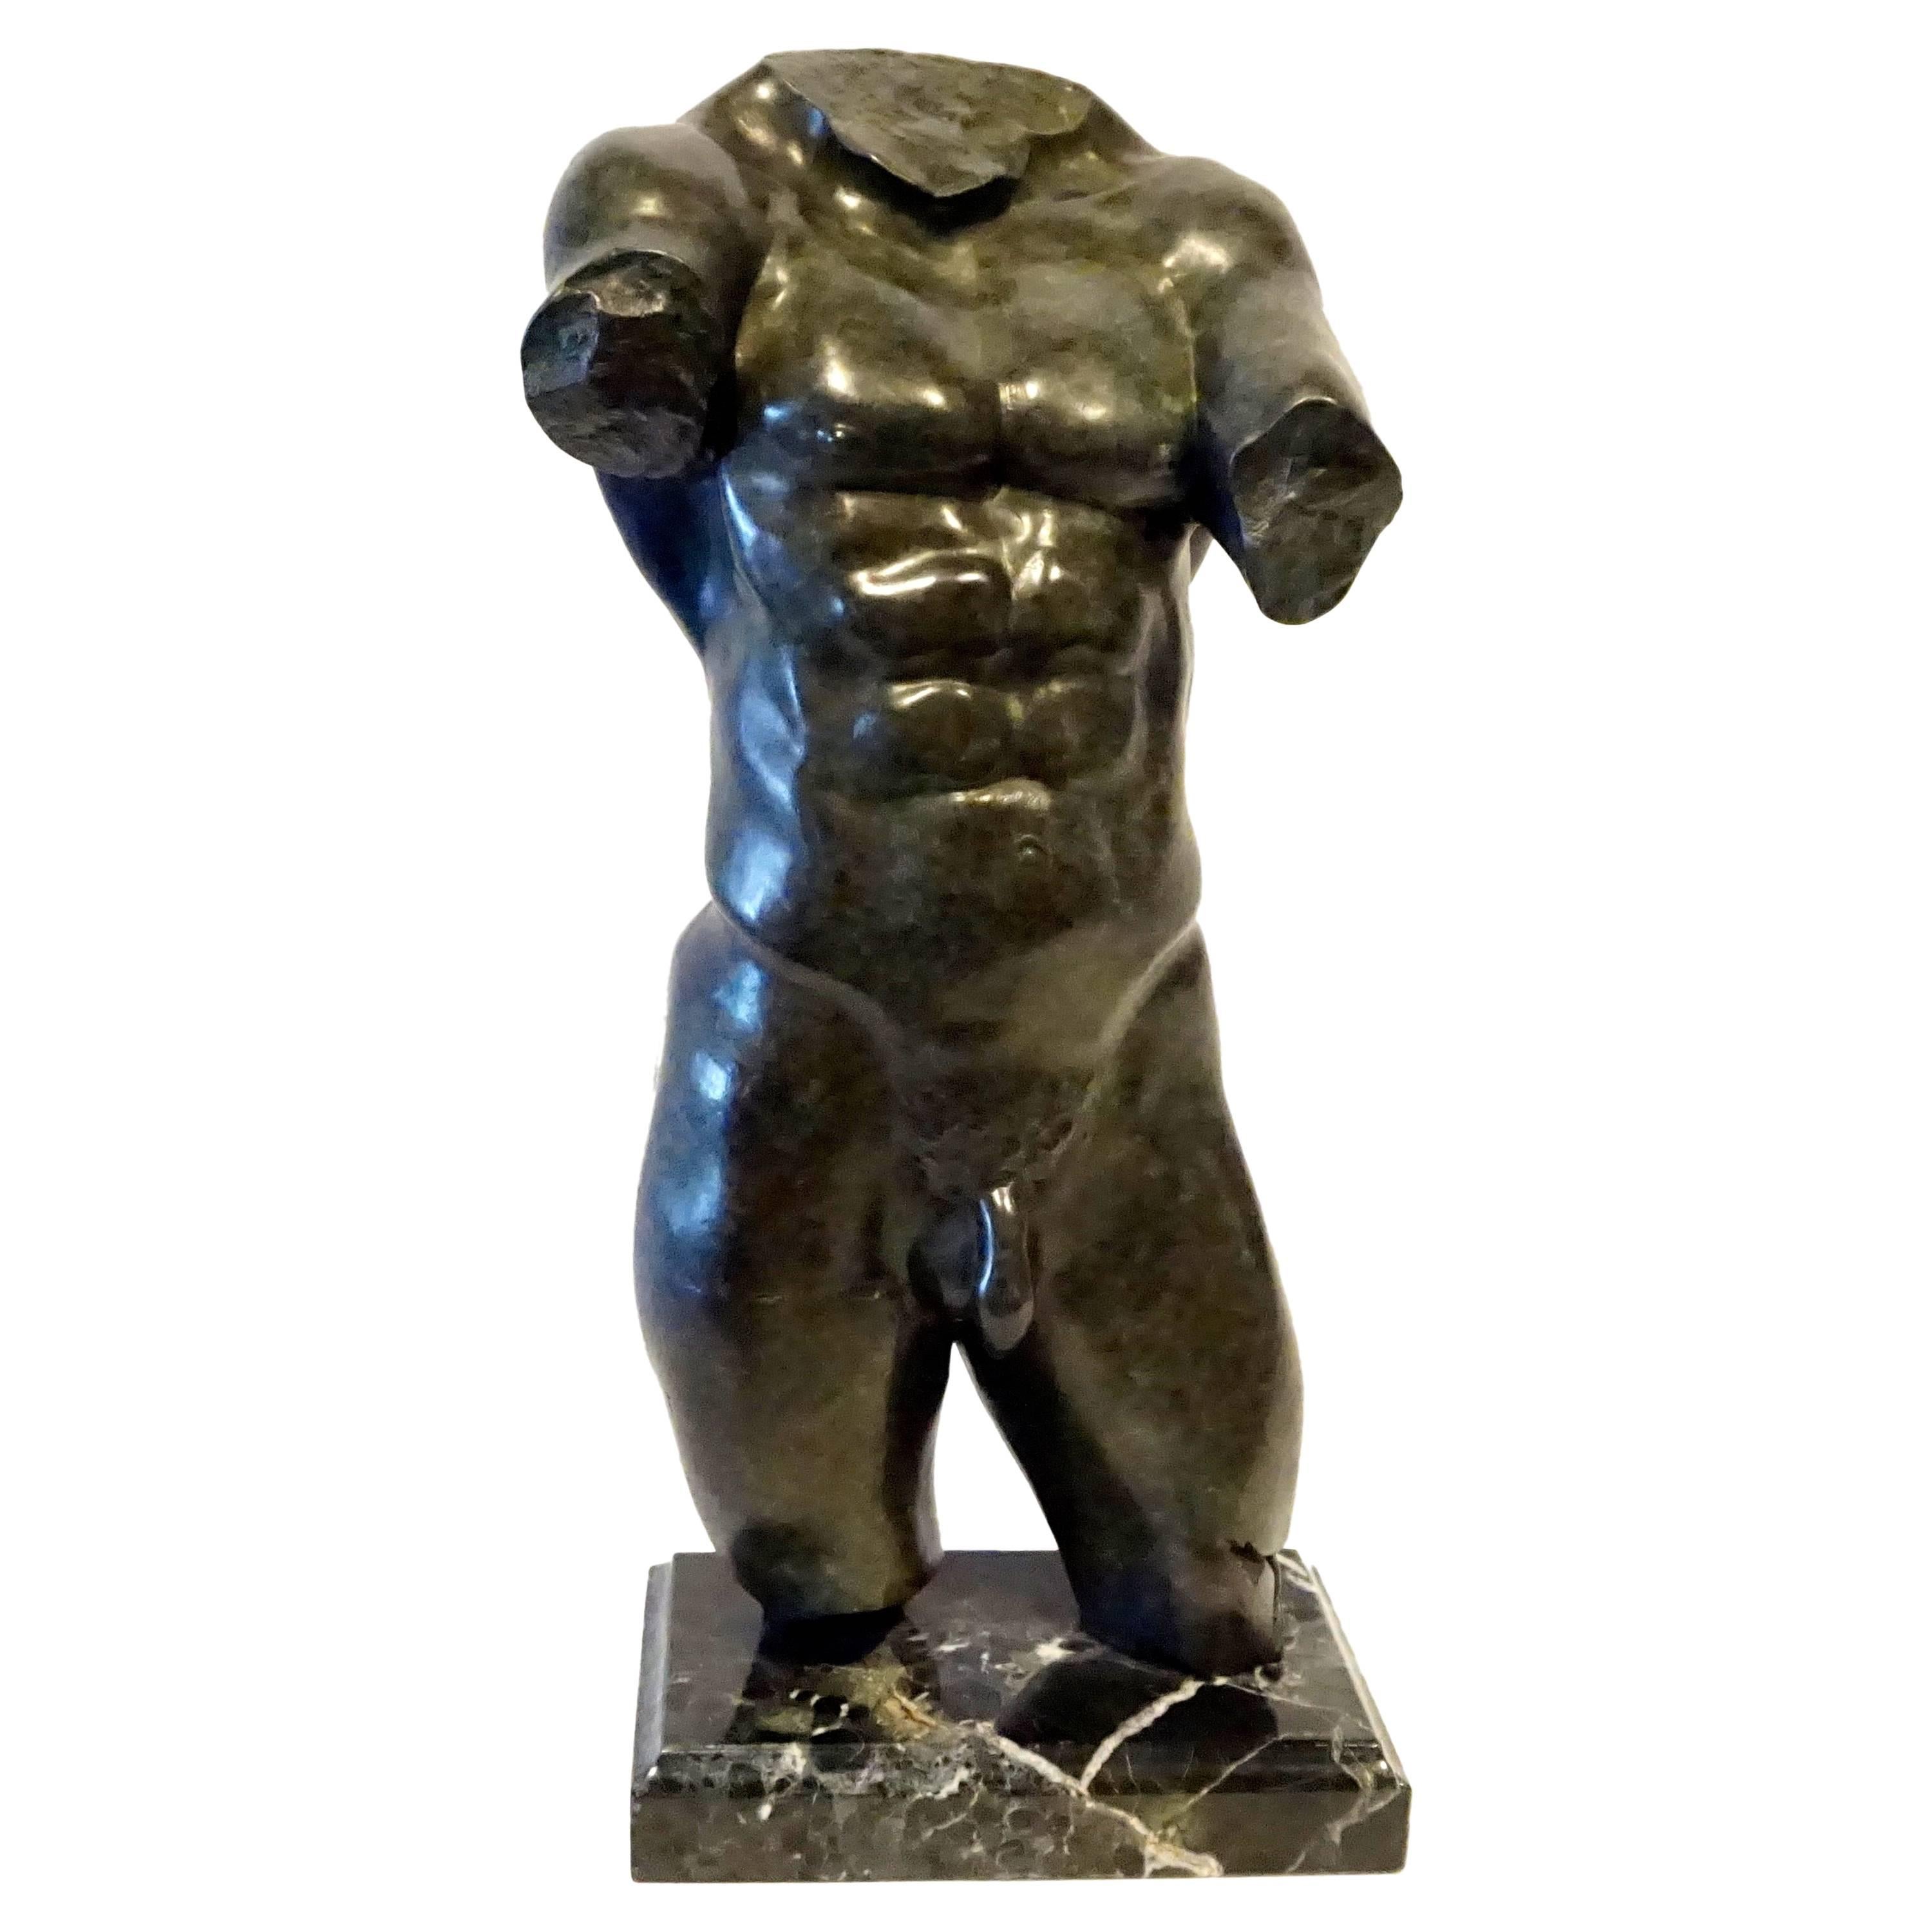 "Torso of Hercules", a 2008 Bronze on Marble Base by American Artist David Henry For Sale